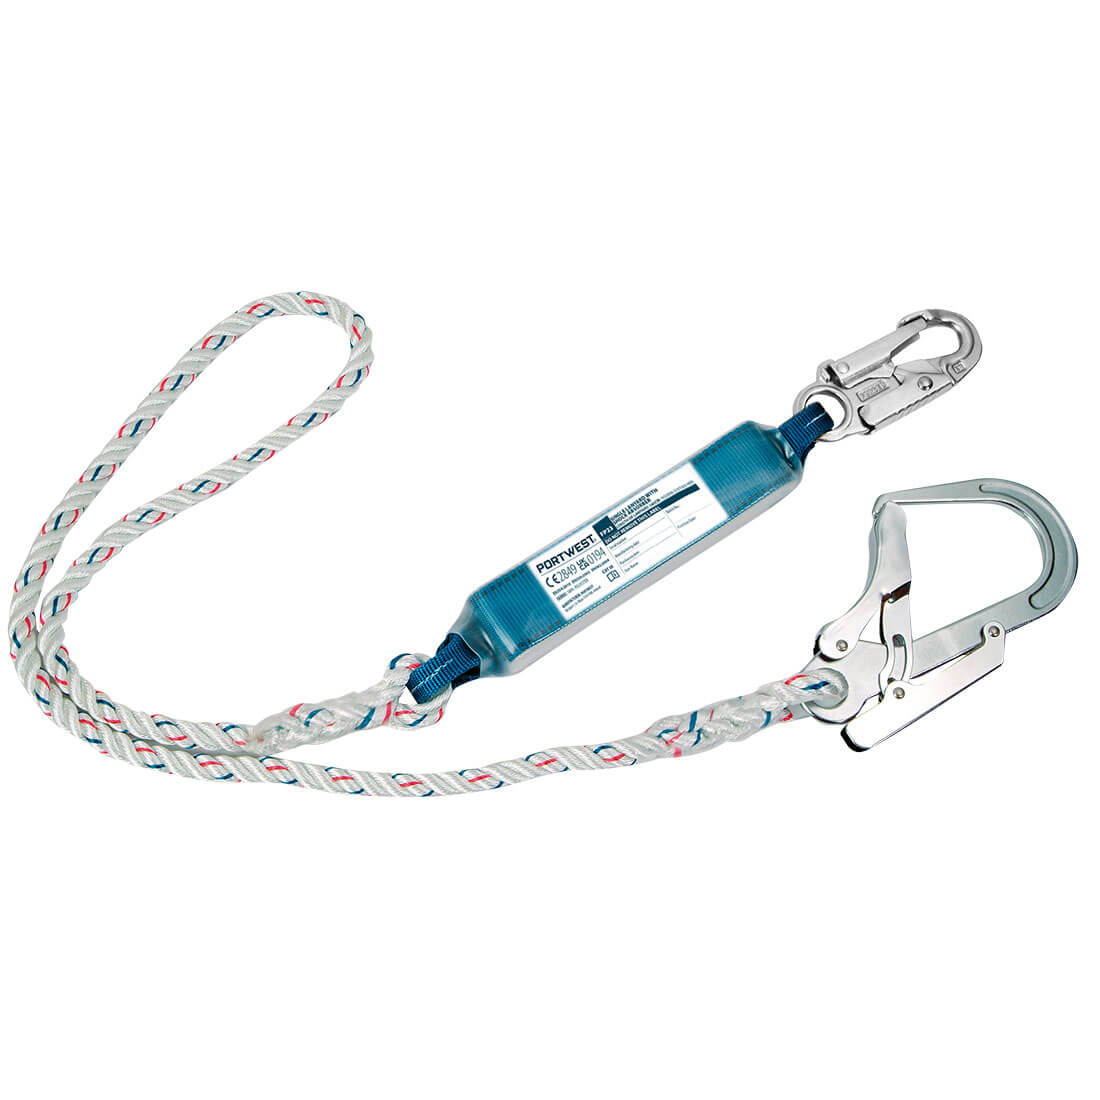 Single 1.8m Lanyard With Shock Absorber - White